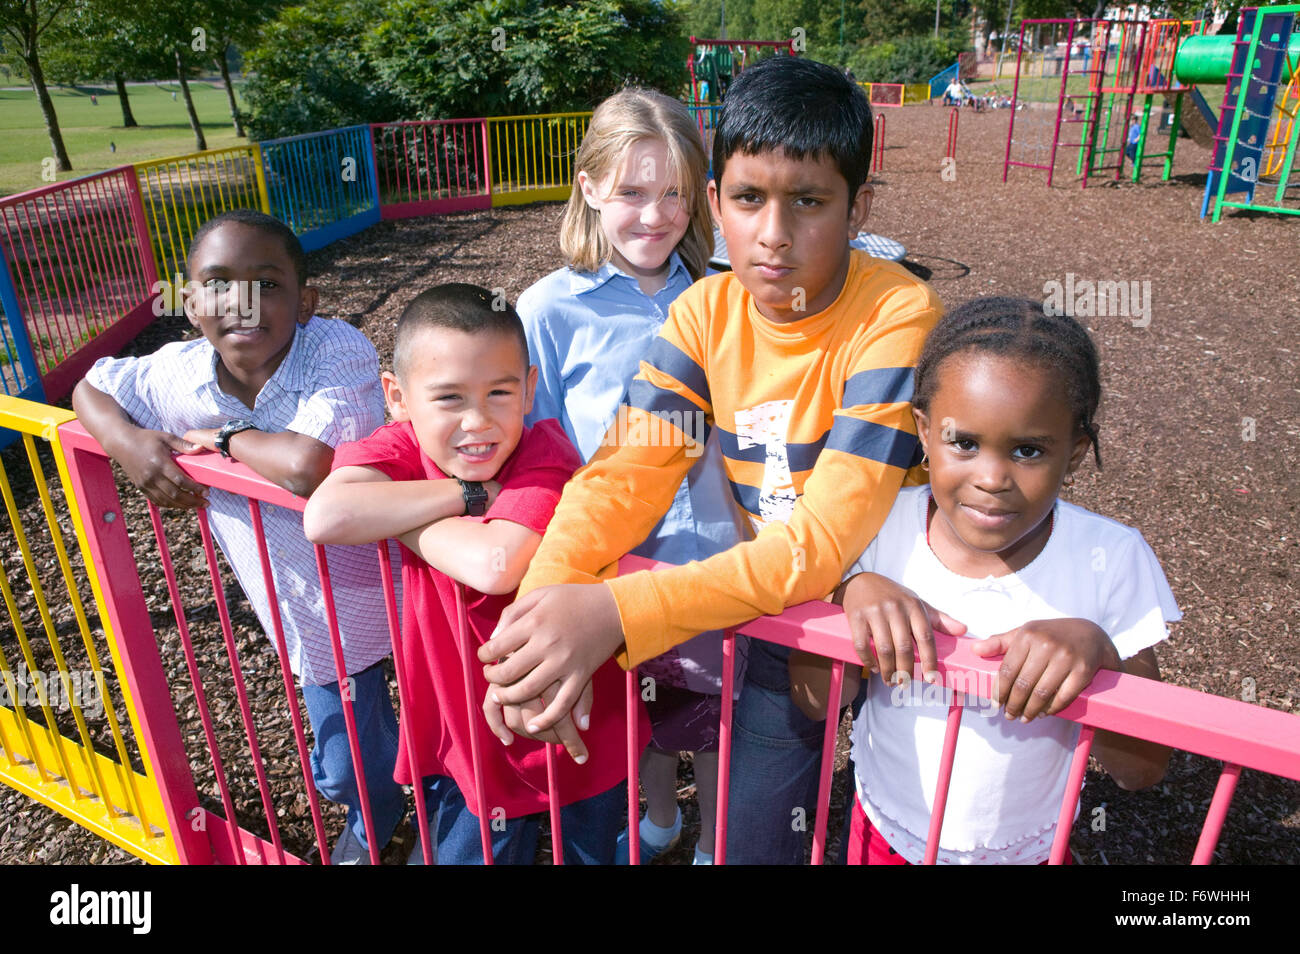 Group of young friends out in the park together, Stock Photo